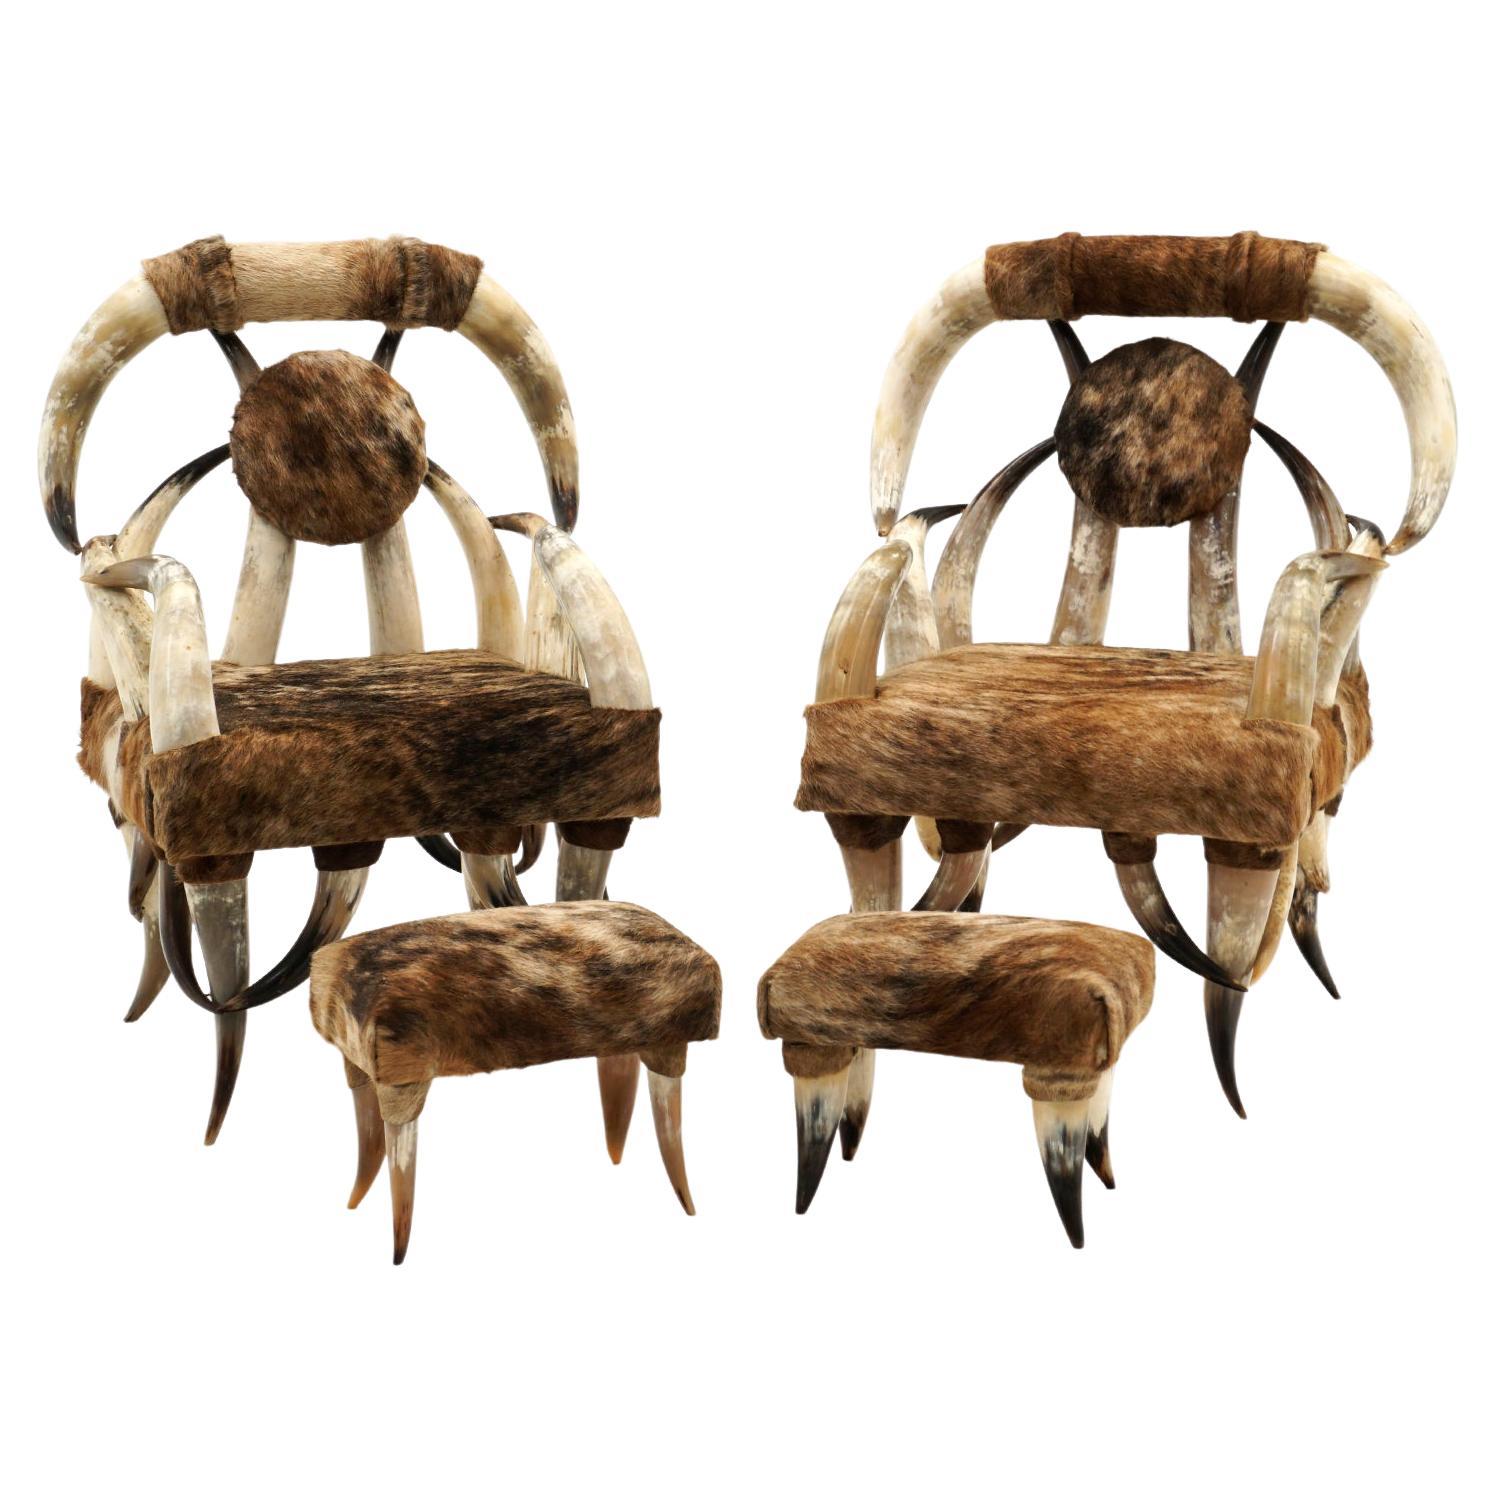 Pair American Steer Horn Chairs with Ottomans. Brown & Tan Cowhide Upholstery For Sale